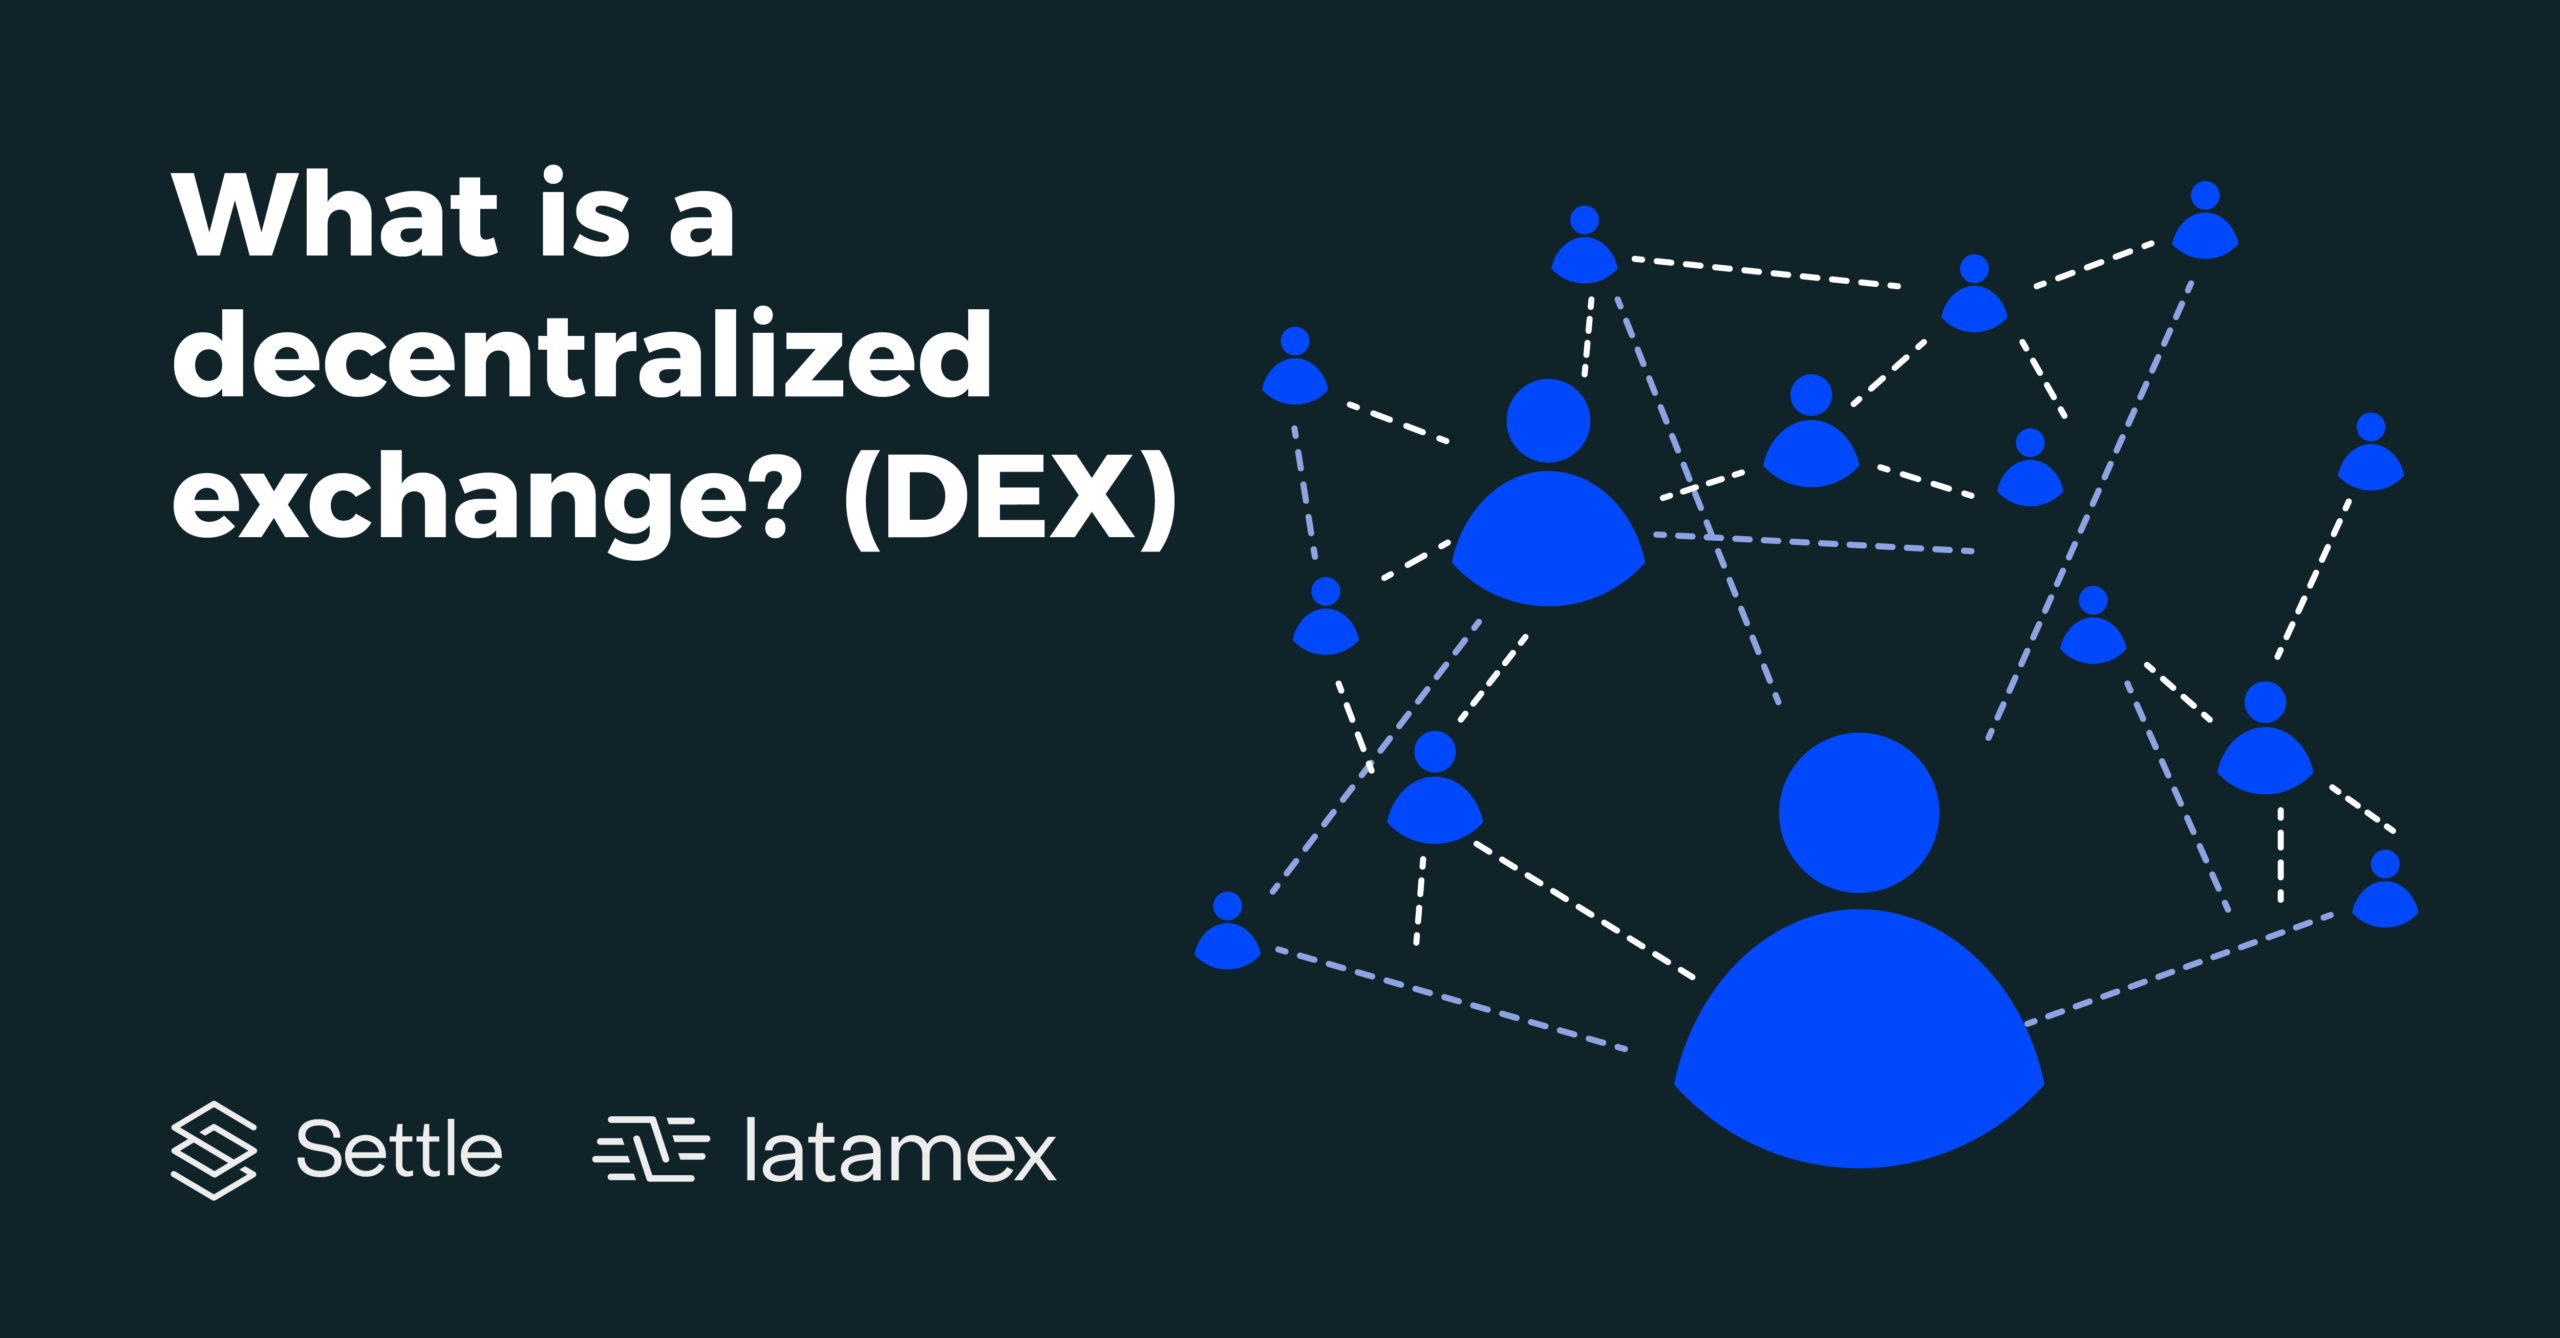 What is a decentralized exchange (DEX)? - Latamex